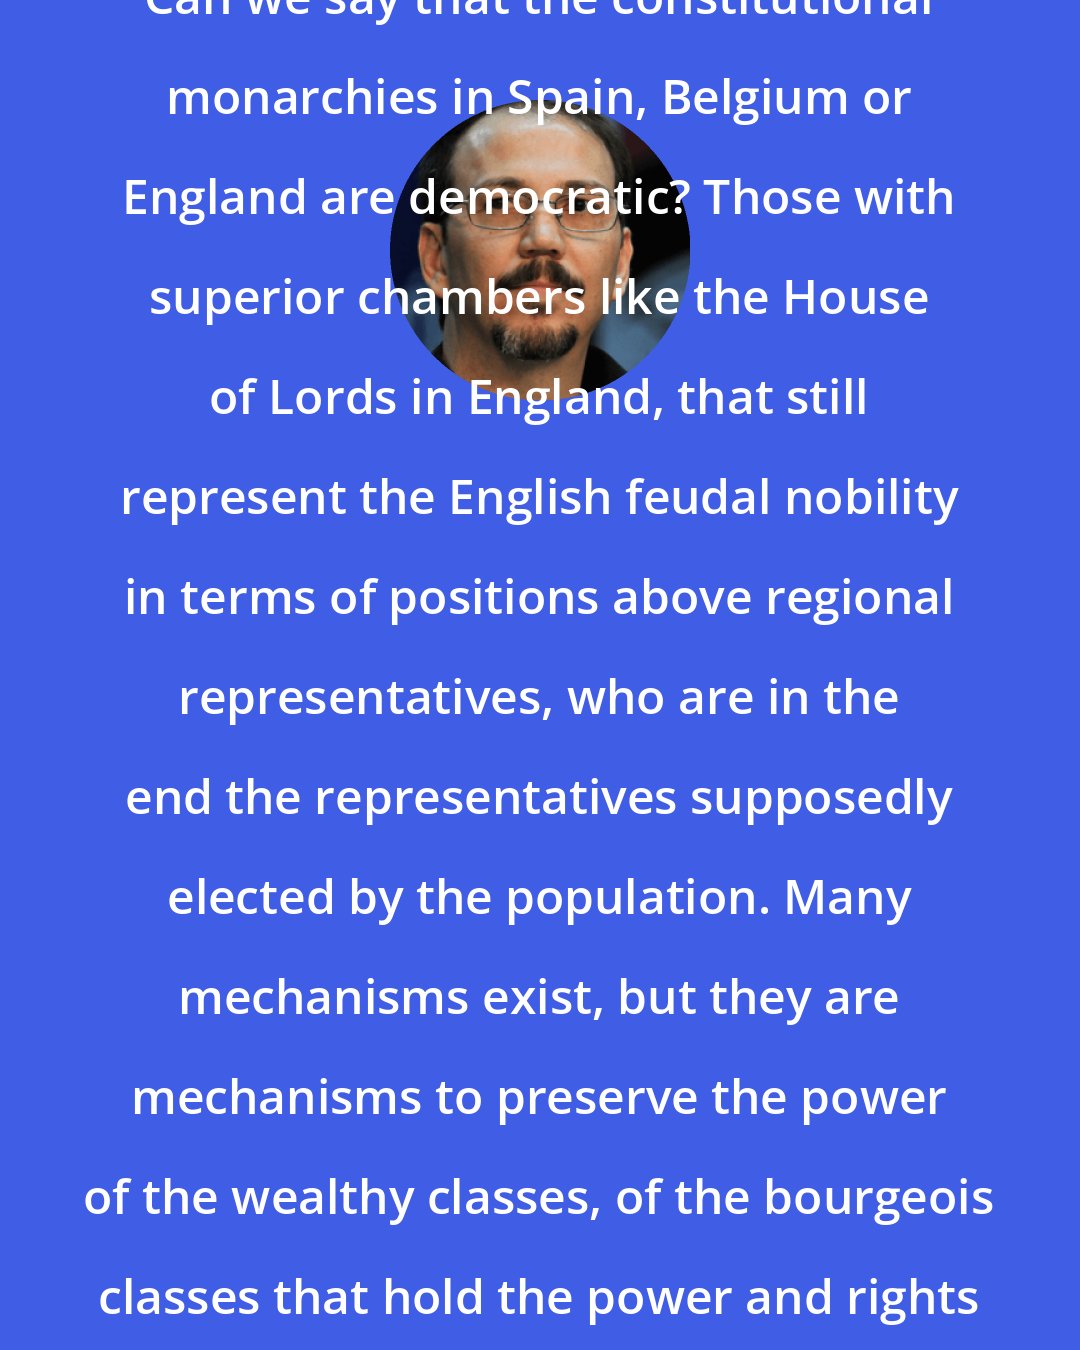 Alejandro Castro Espin: Can we say that the constitutional monarchies in Spain, Belgium or England are democratic? Those with superior chambers like the House of Lords in England, that still represent the English feudal nobility in terms of positions above regional representatives, who are in the end the representatives supposedly elected by the population. Many mechanisms exist, but they are mechanisms to preserve the power of the wealthy classes, of the bourgeois classes that hold the power and rights above the rest of the society.